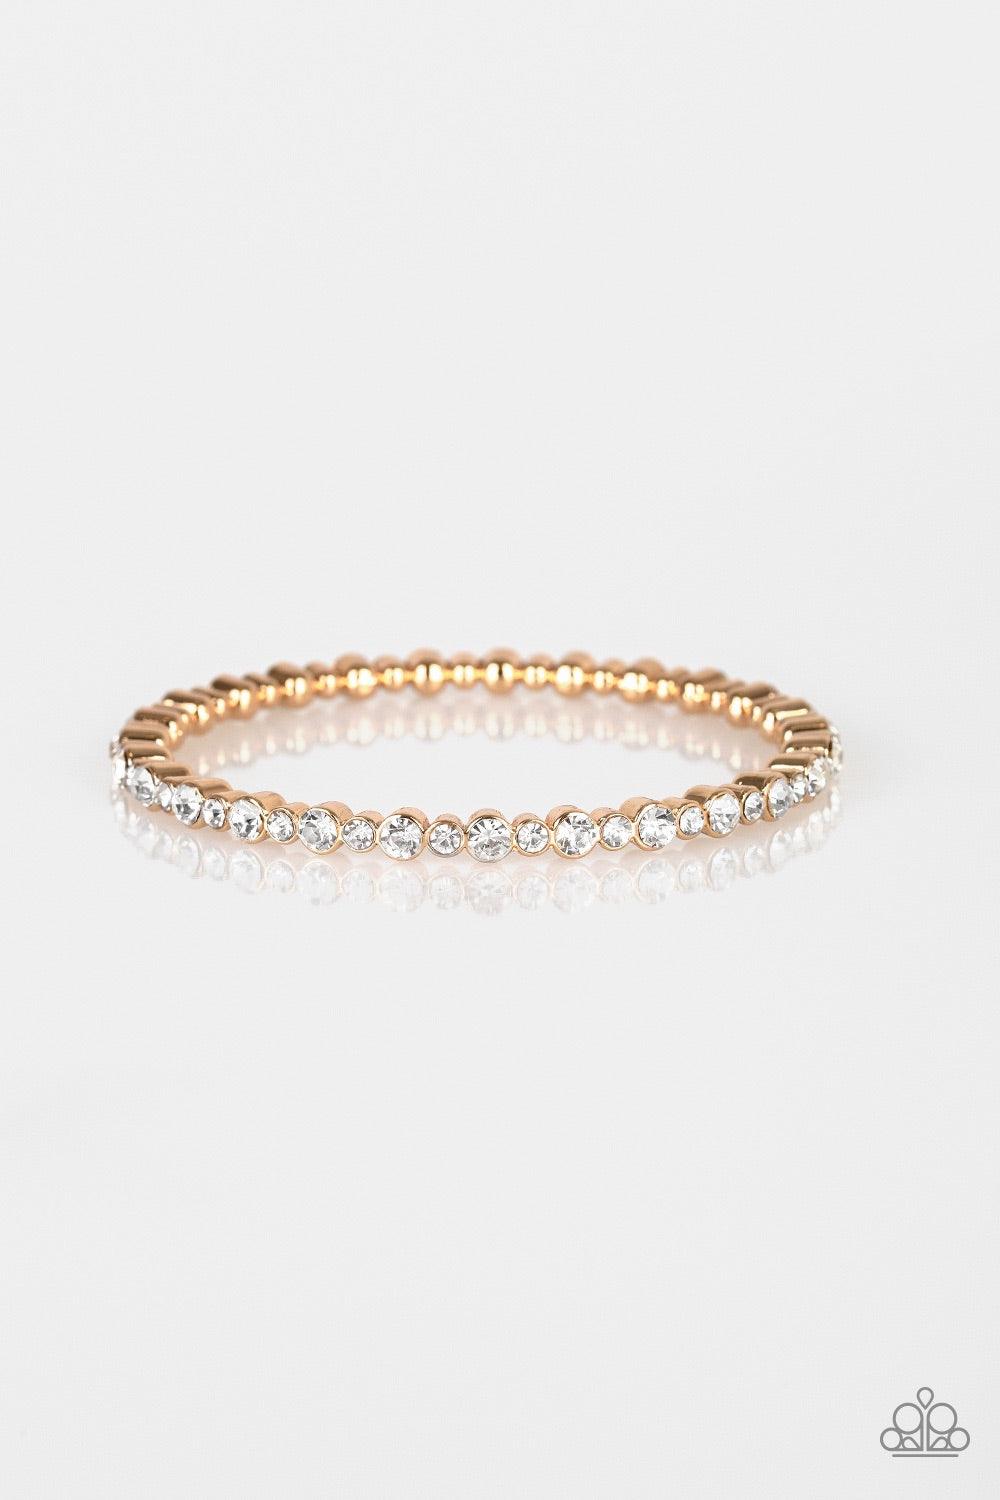 Paparazzi Accessories Seven Figure Fabulous - Gold A glistening gold bangle is encrusted in countless white rhinestones for a timeless look. Jewelry